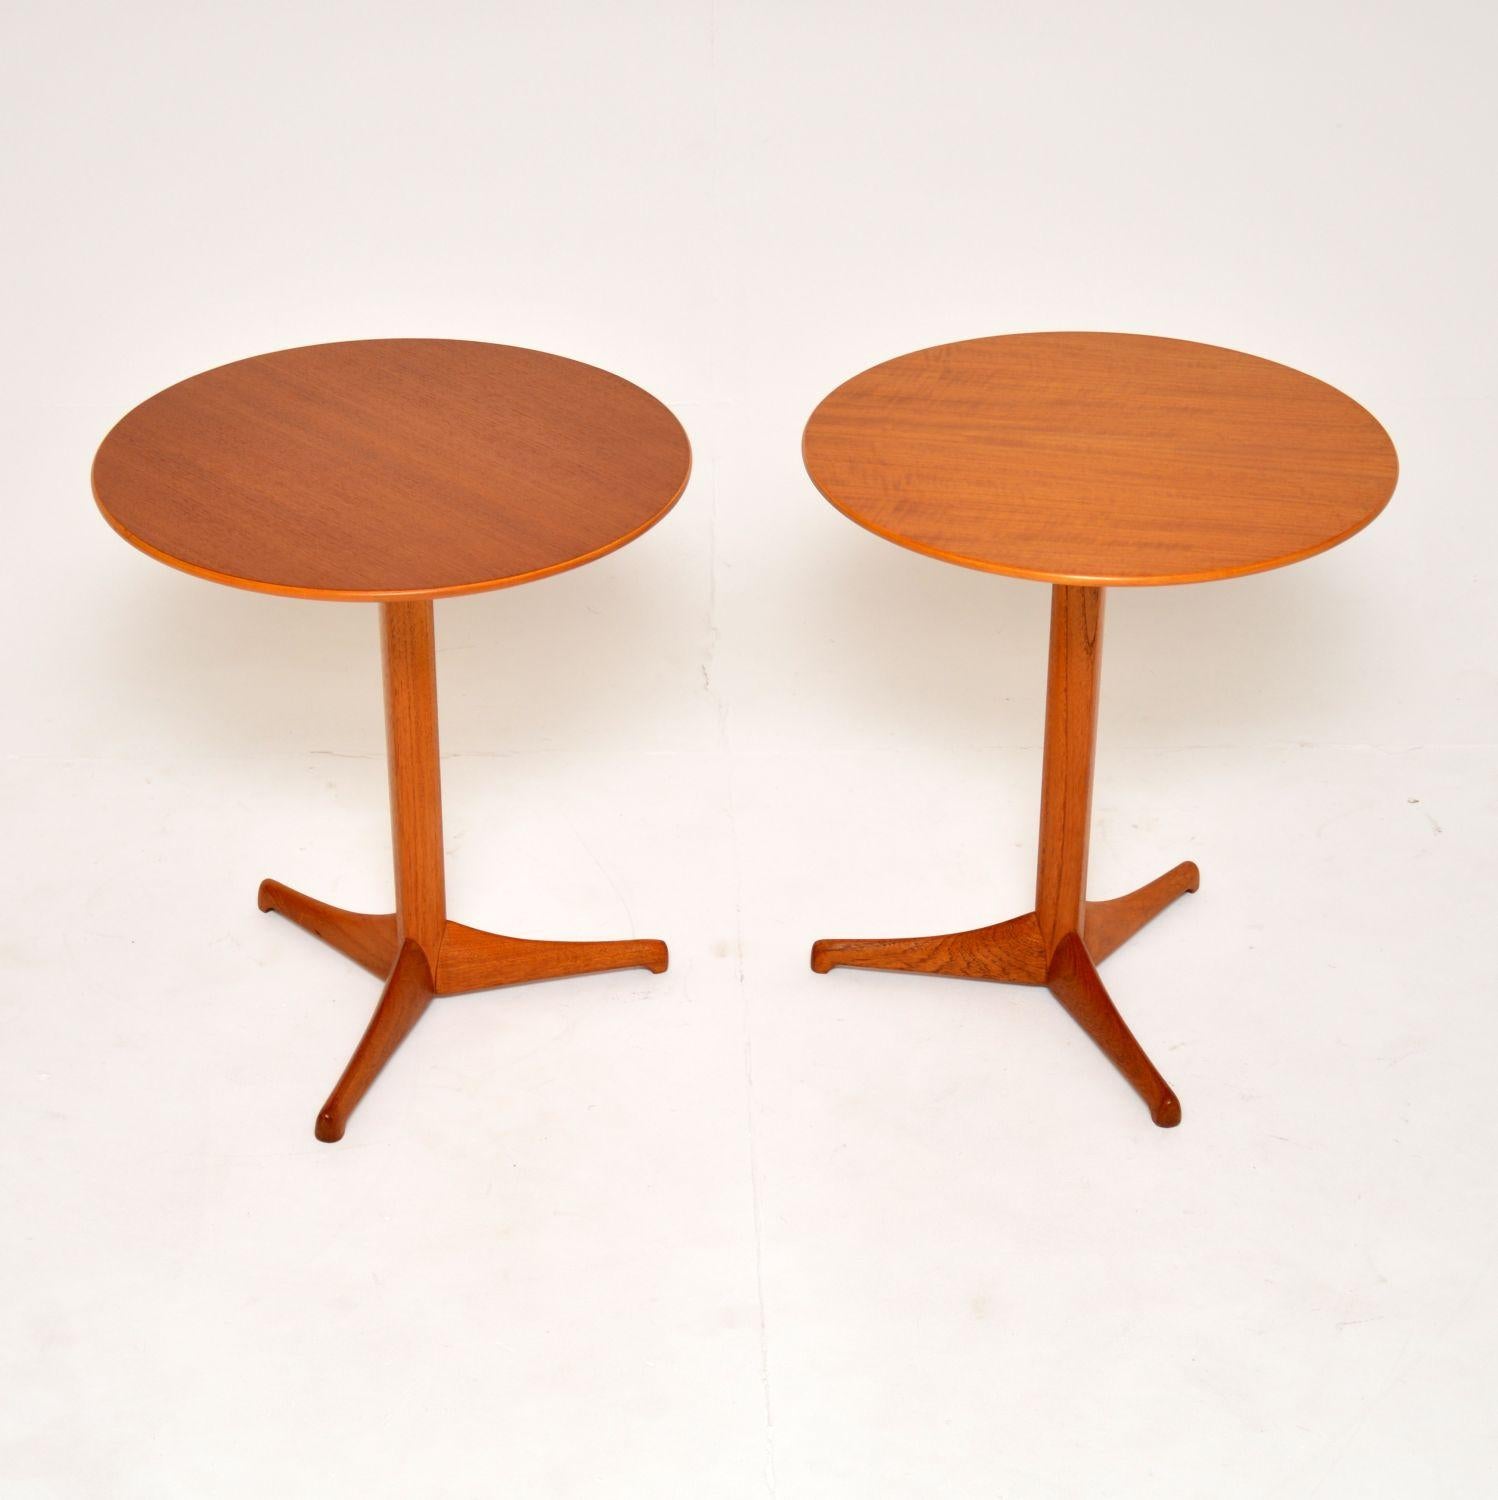 A stylish and very rare pair of vintage teak side tables, this model is called ‘Applet’ or Apple’. They were designed by Kerstin Horlin-Holmquist, they were made in Sweden in the 1960’s.

The quality is outstanding, they are beautifully made from